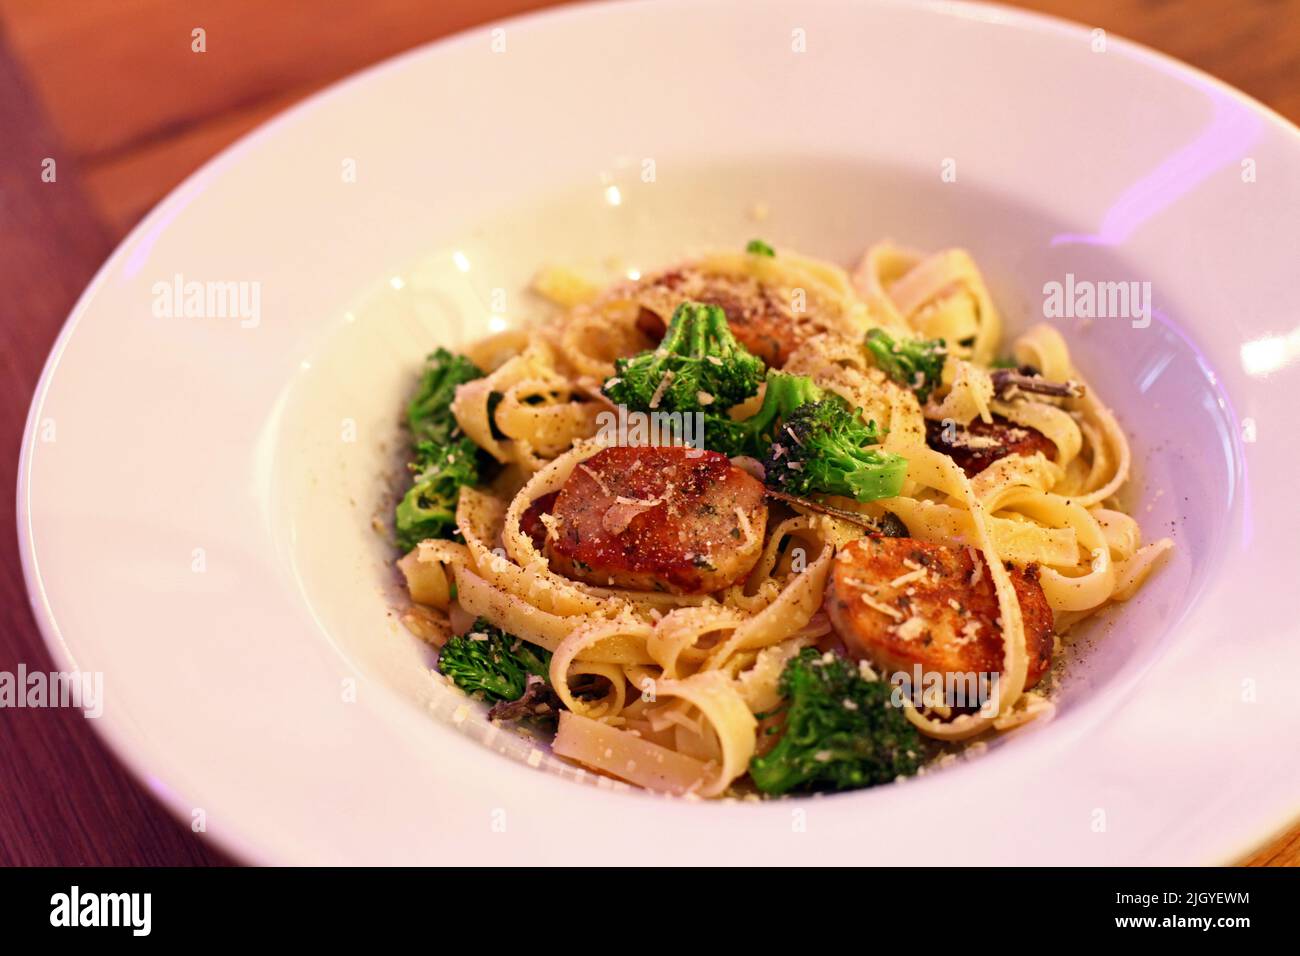 Pasta with broccoli and salmon fish in the dinner plate. Stock Photo